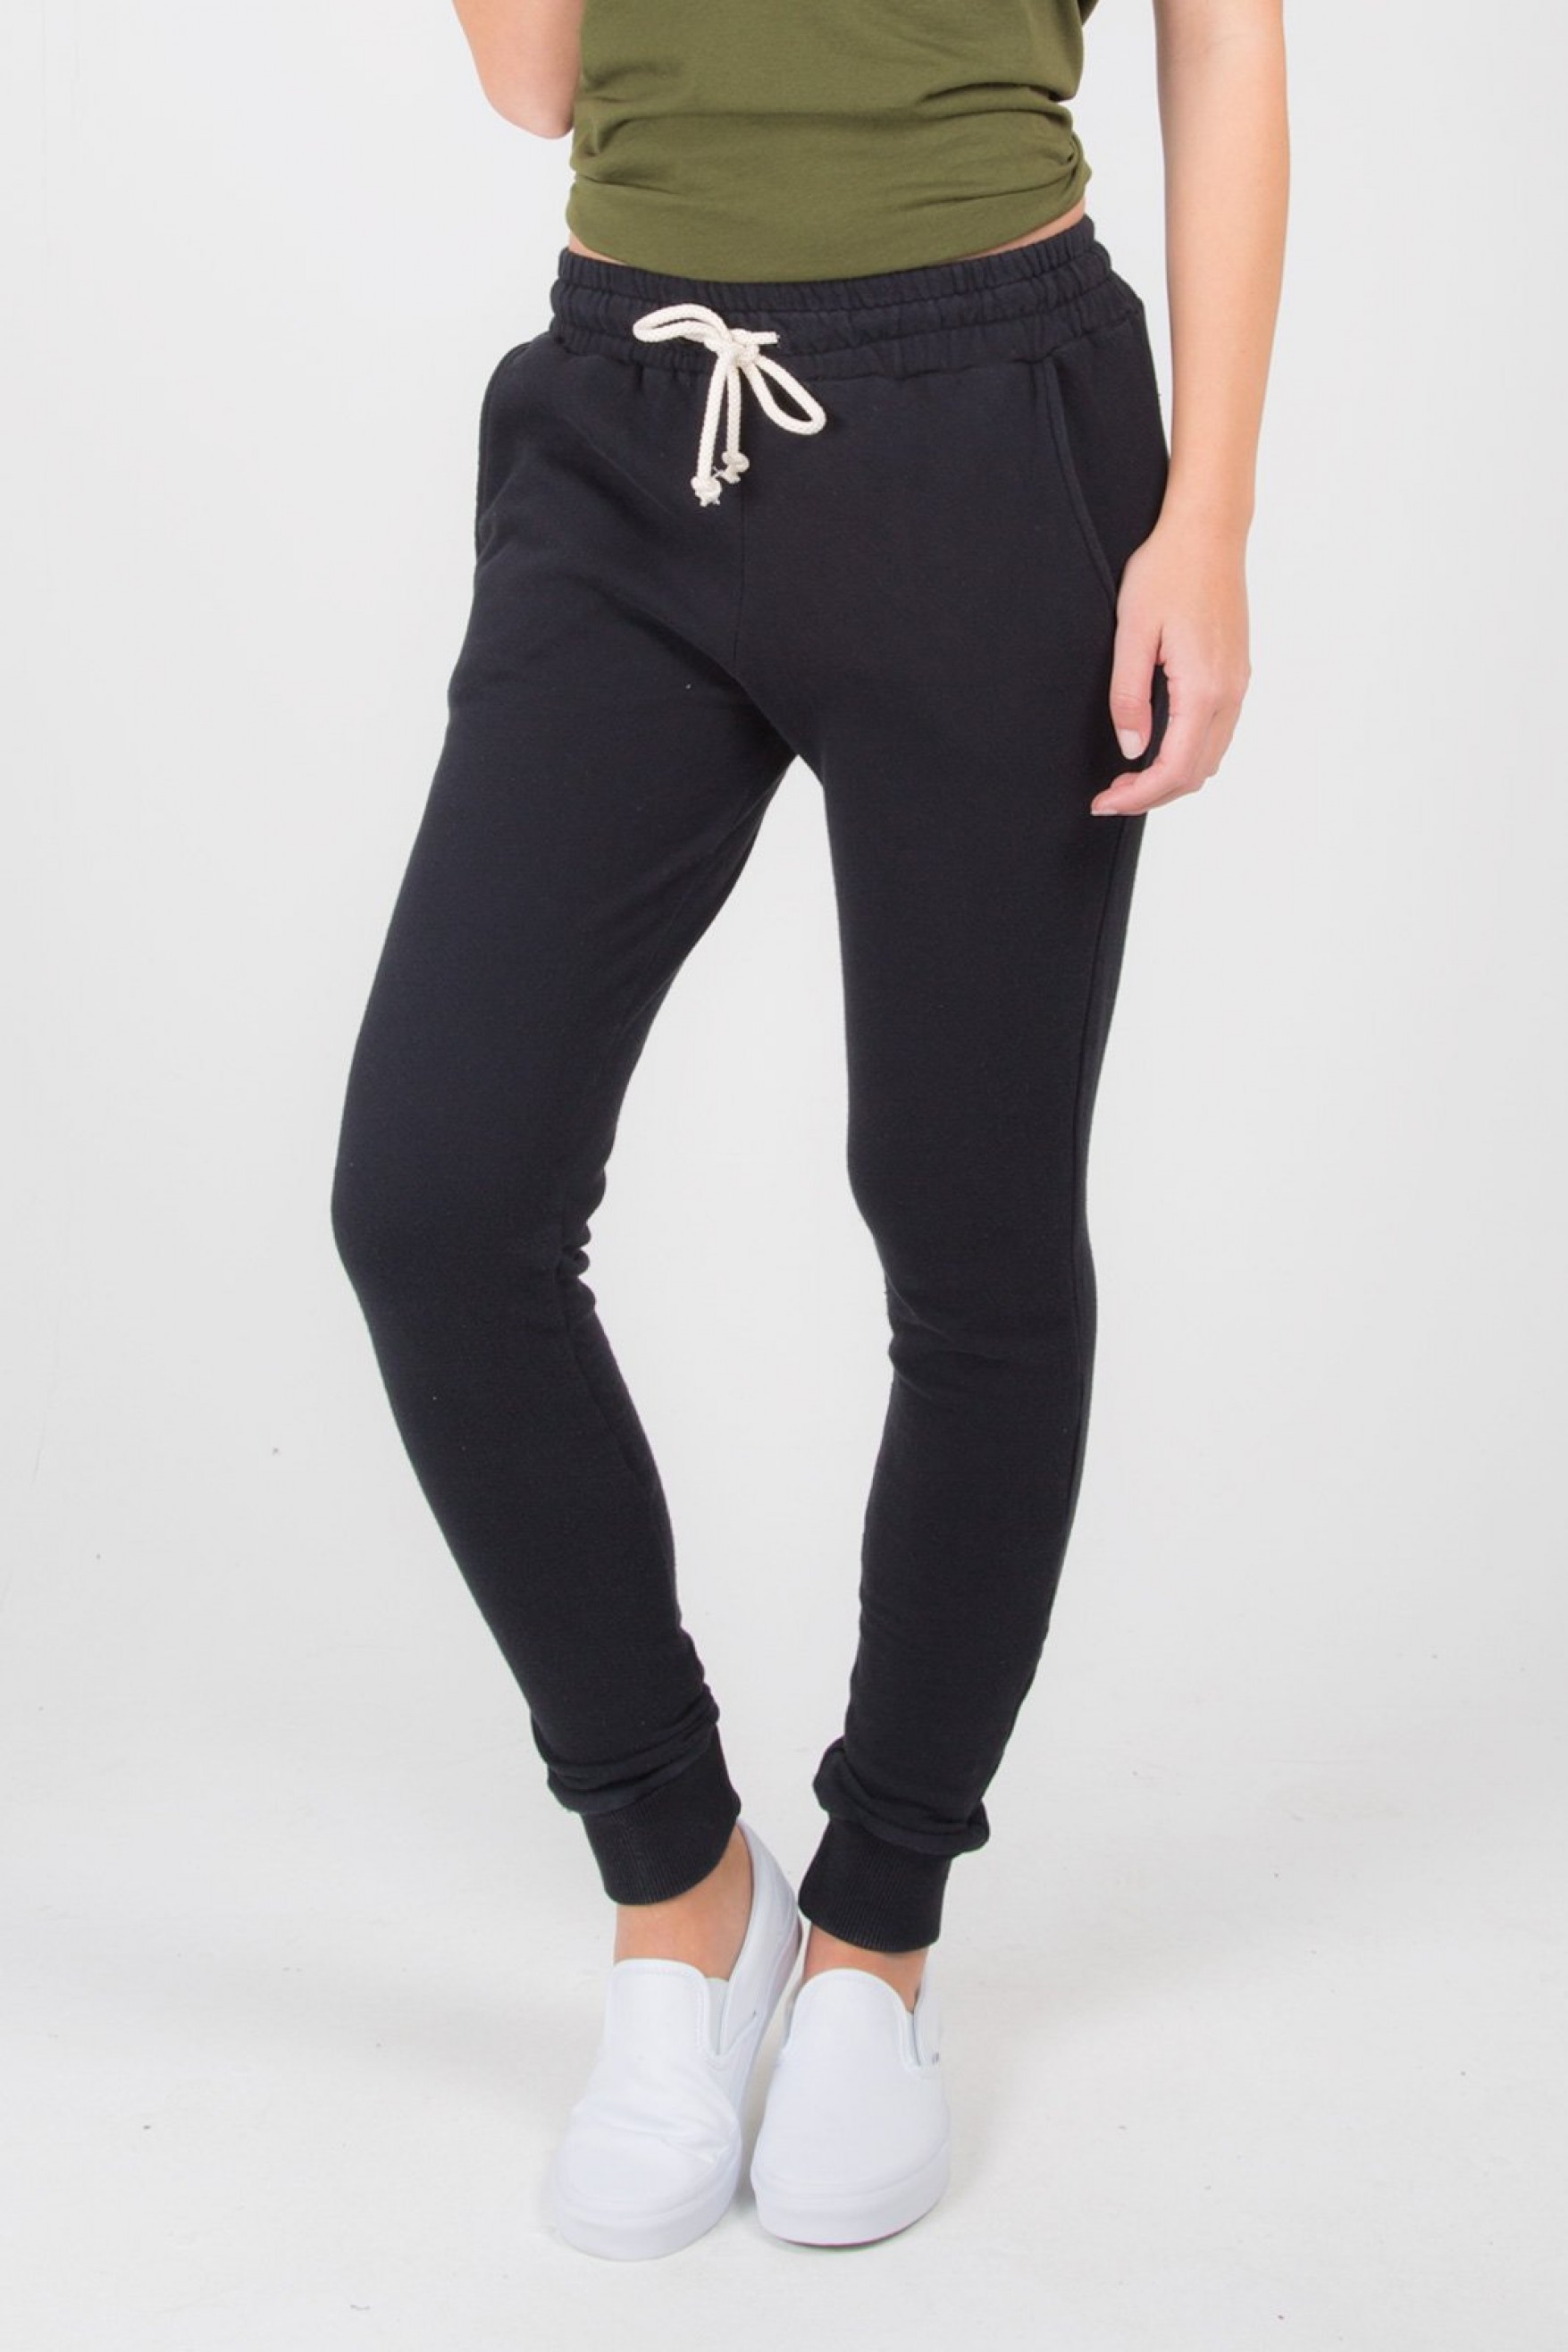 THE GYM PEOPLE Womens Joggers Pants